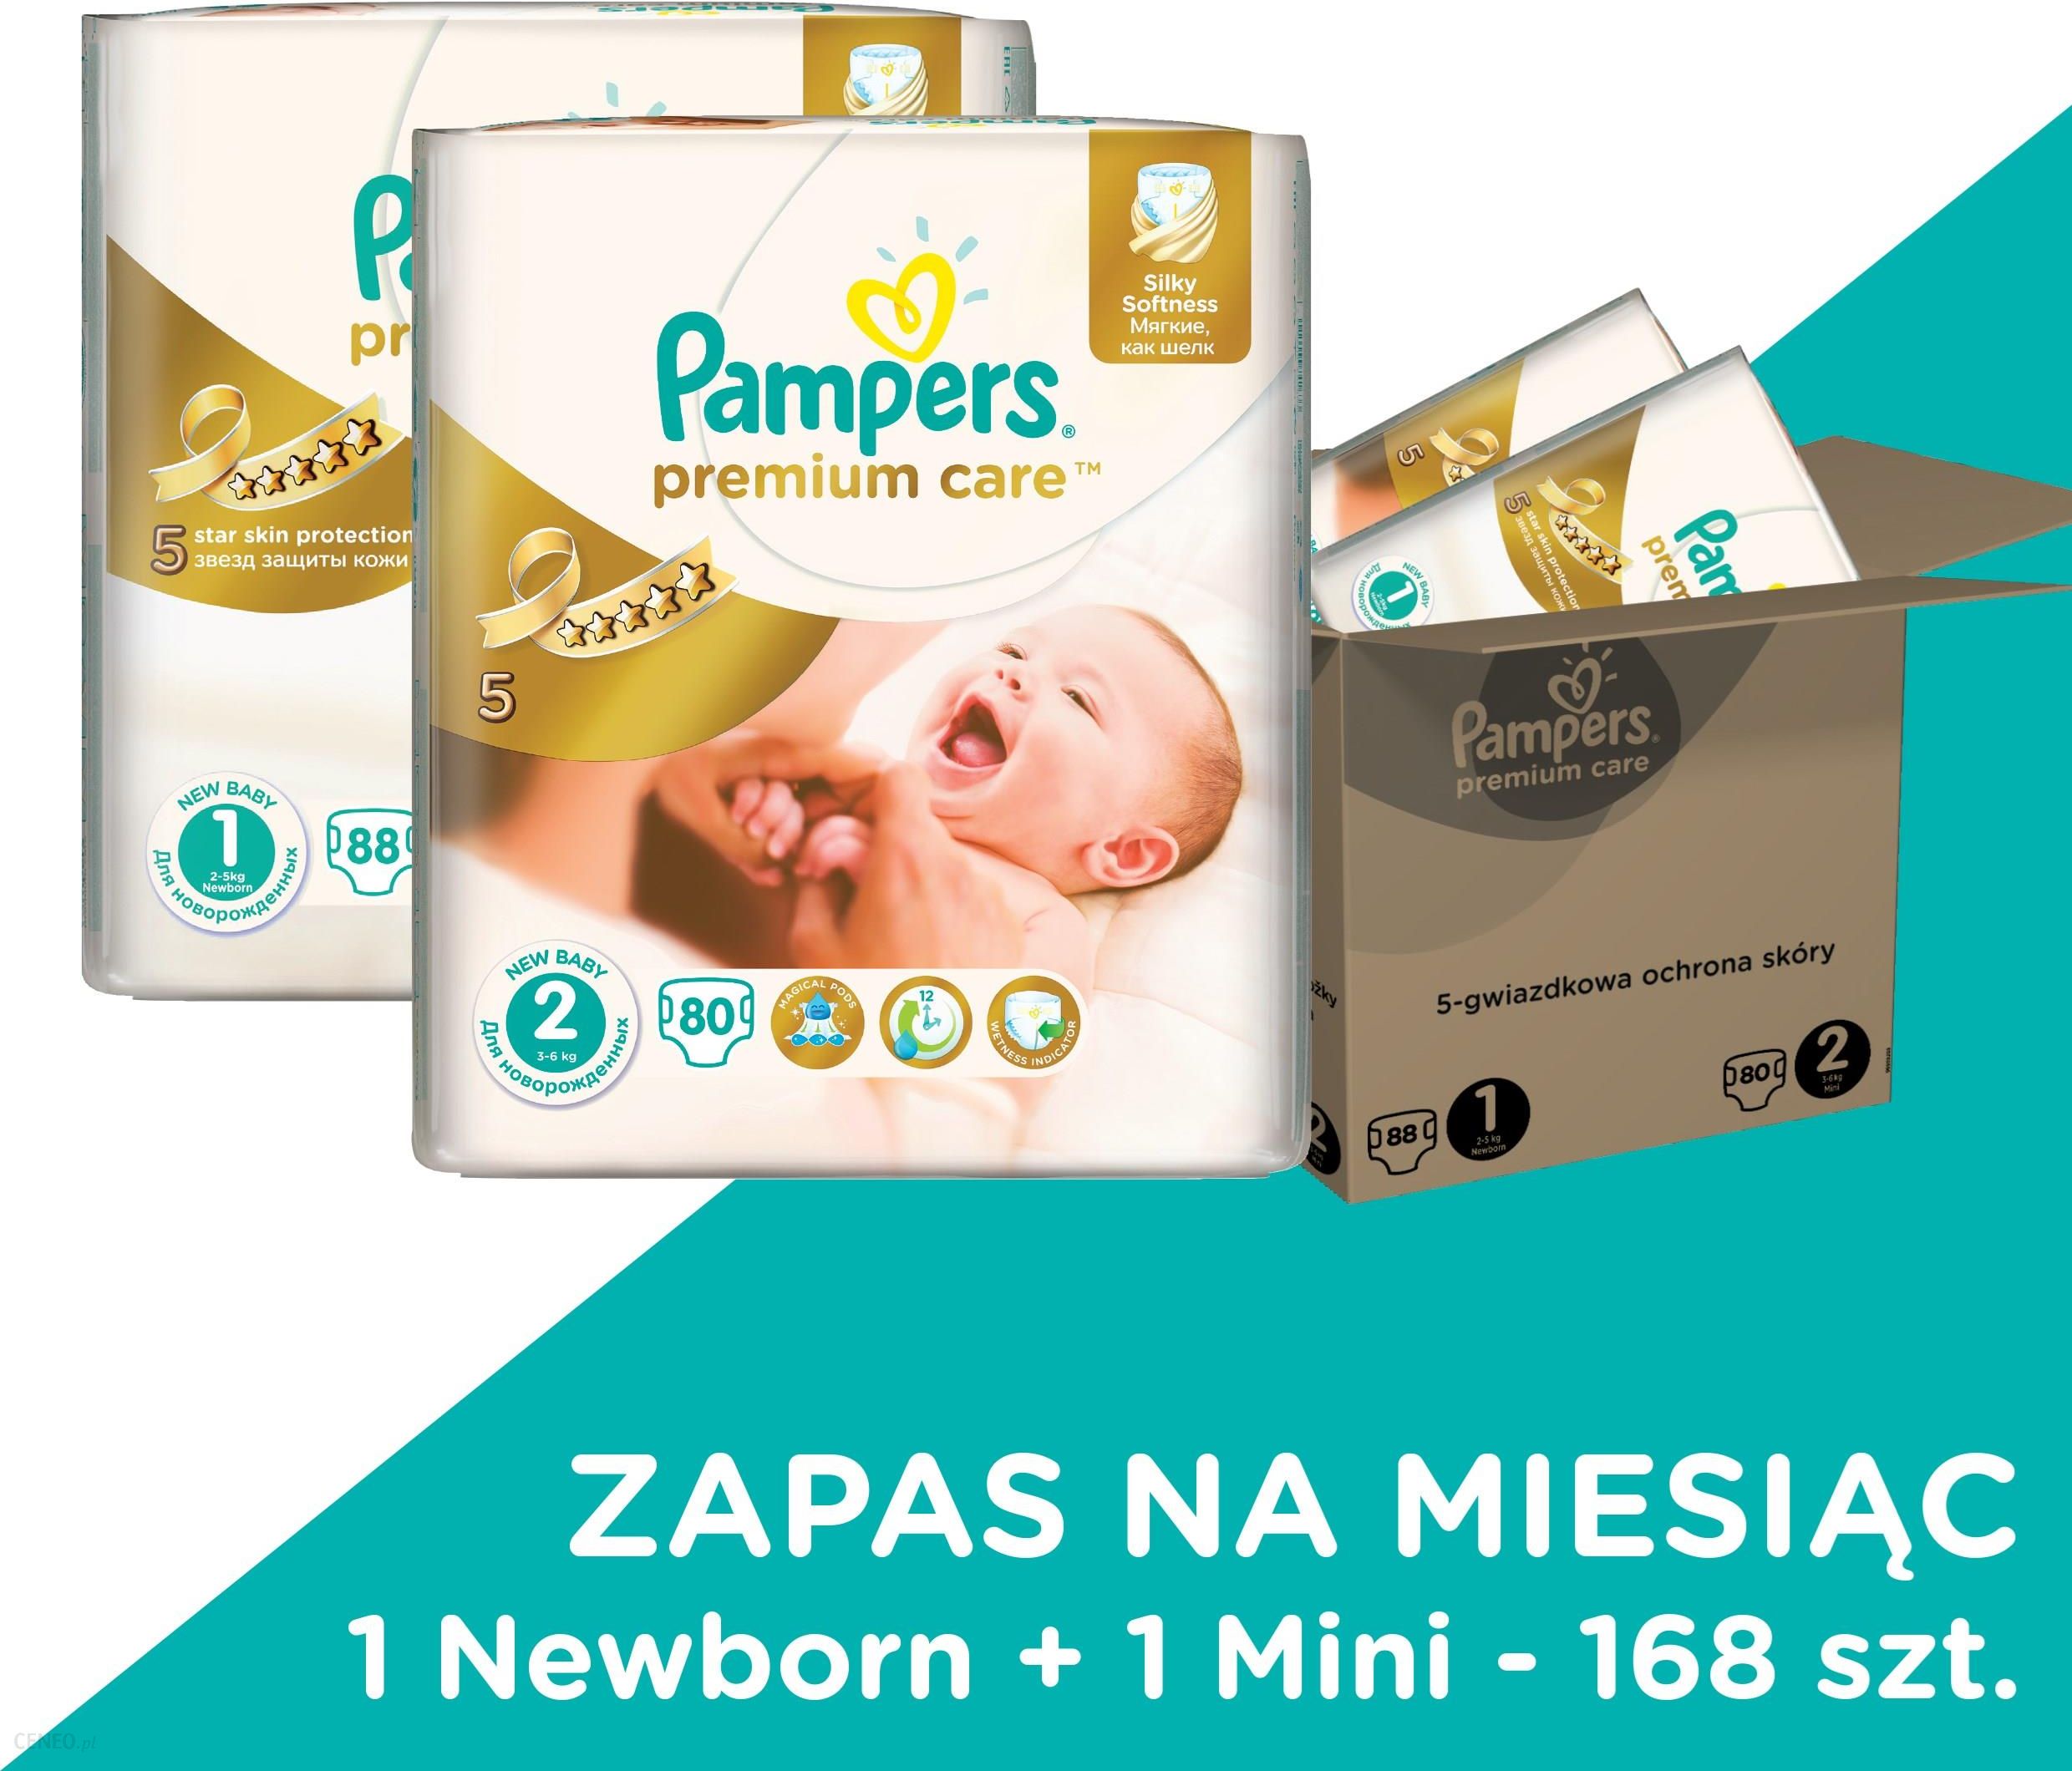 pampersy pampers rozmiary 2